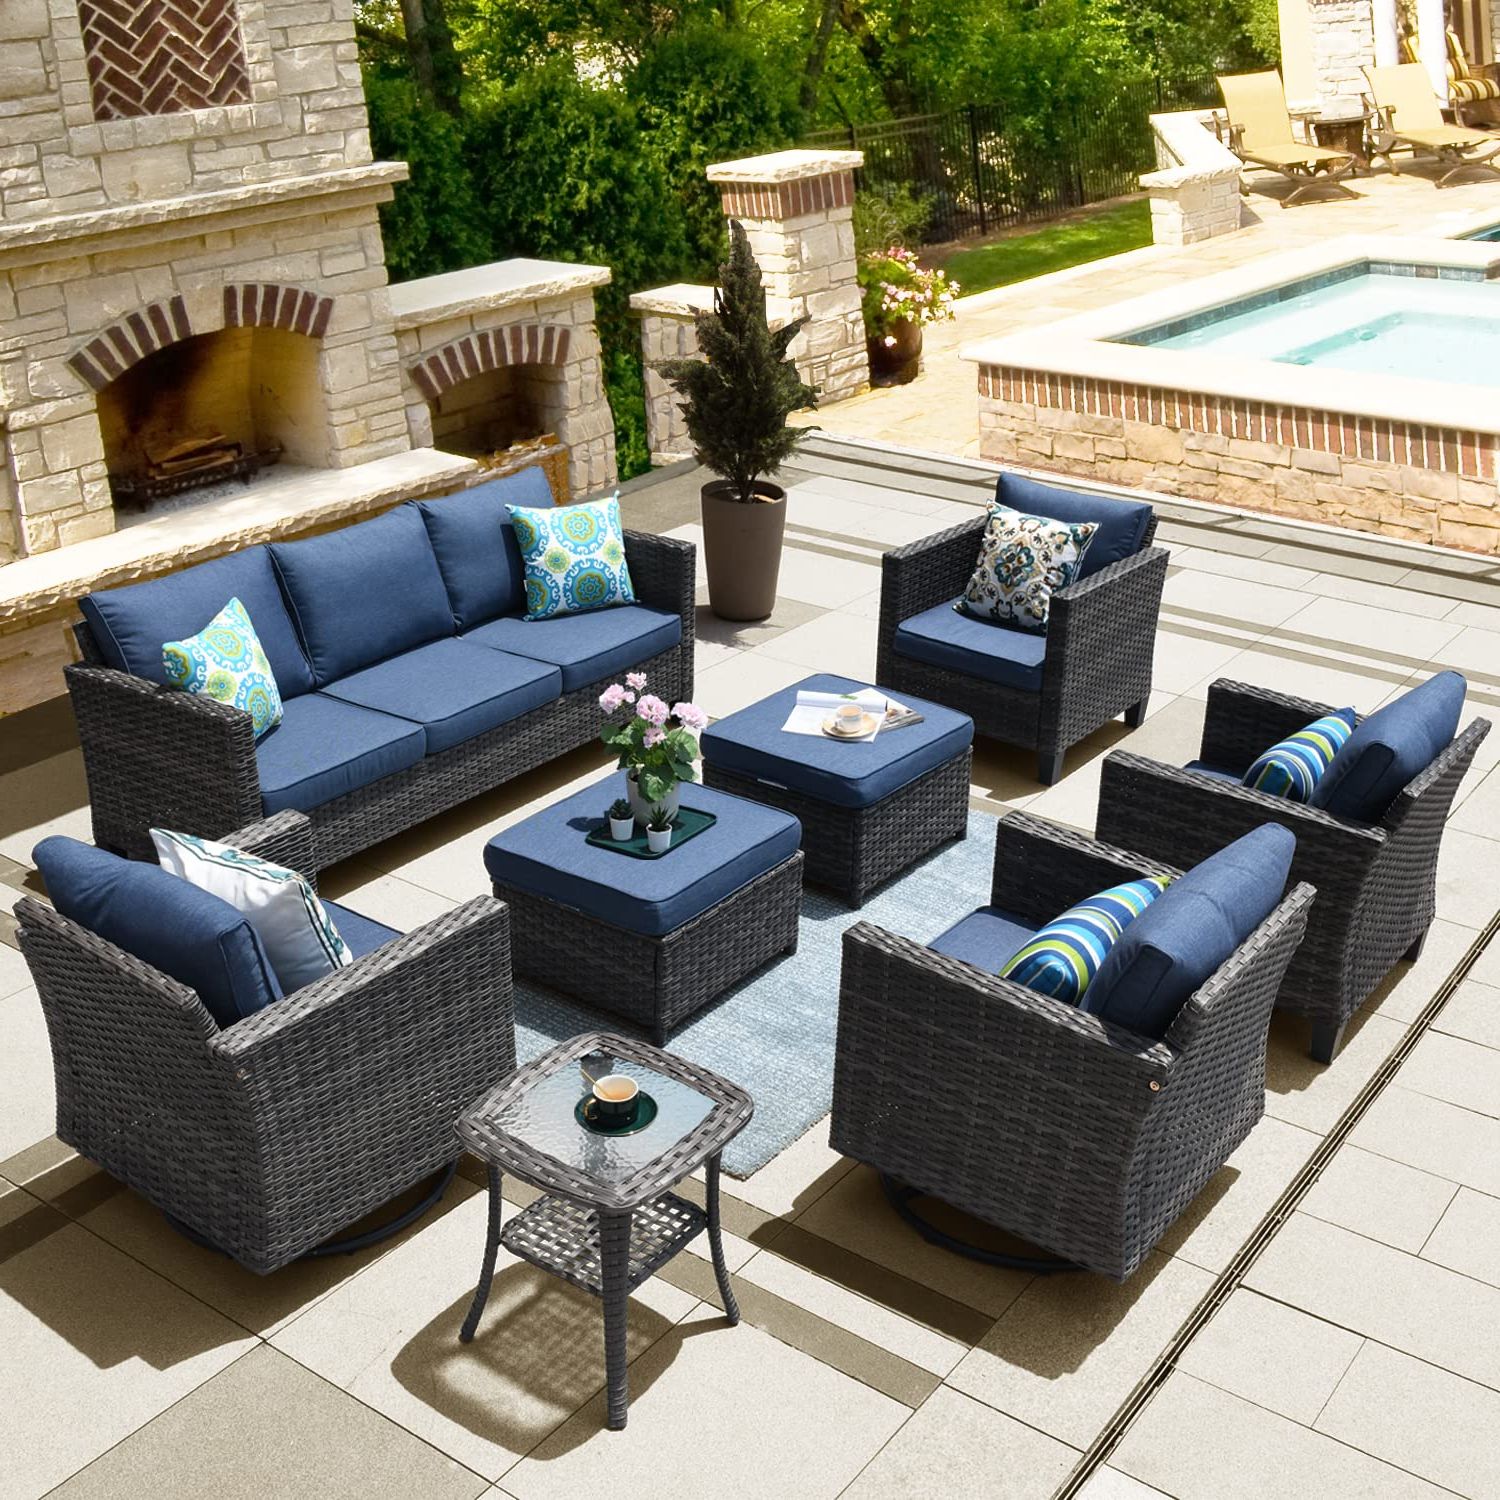 8 Pcs Outdoor Patio Furniture Set Within Trendy Amazon: Ovios Patio Furniture Set 8 Pcs Outdoor Wicker Rocking Swivel  Chairs Sectional Sofa Set With Single Chairs High Back Rattan Sofa For Yard  Garden Porch (denim Blue) : Patio, Lawn & (Photo 1 of 15)